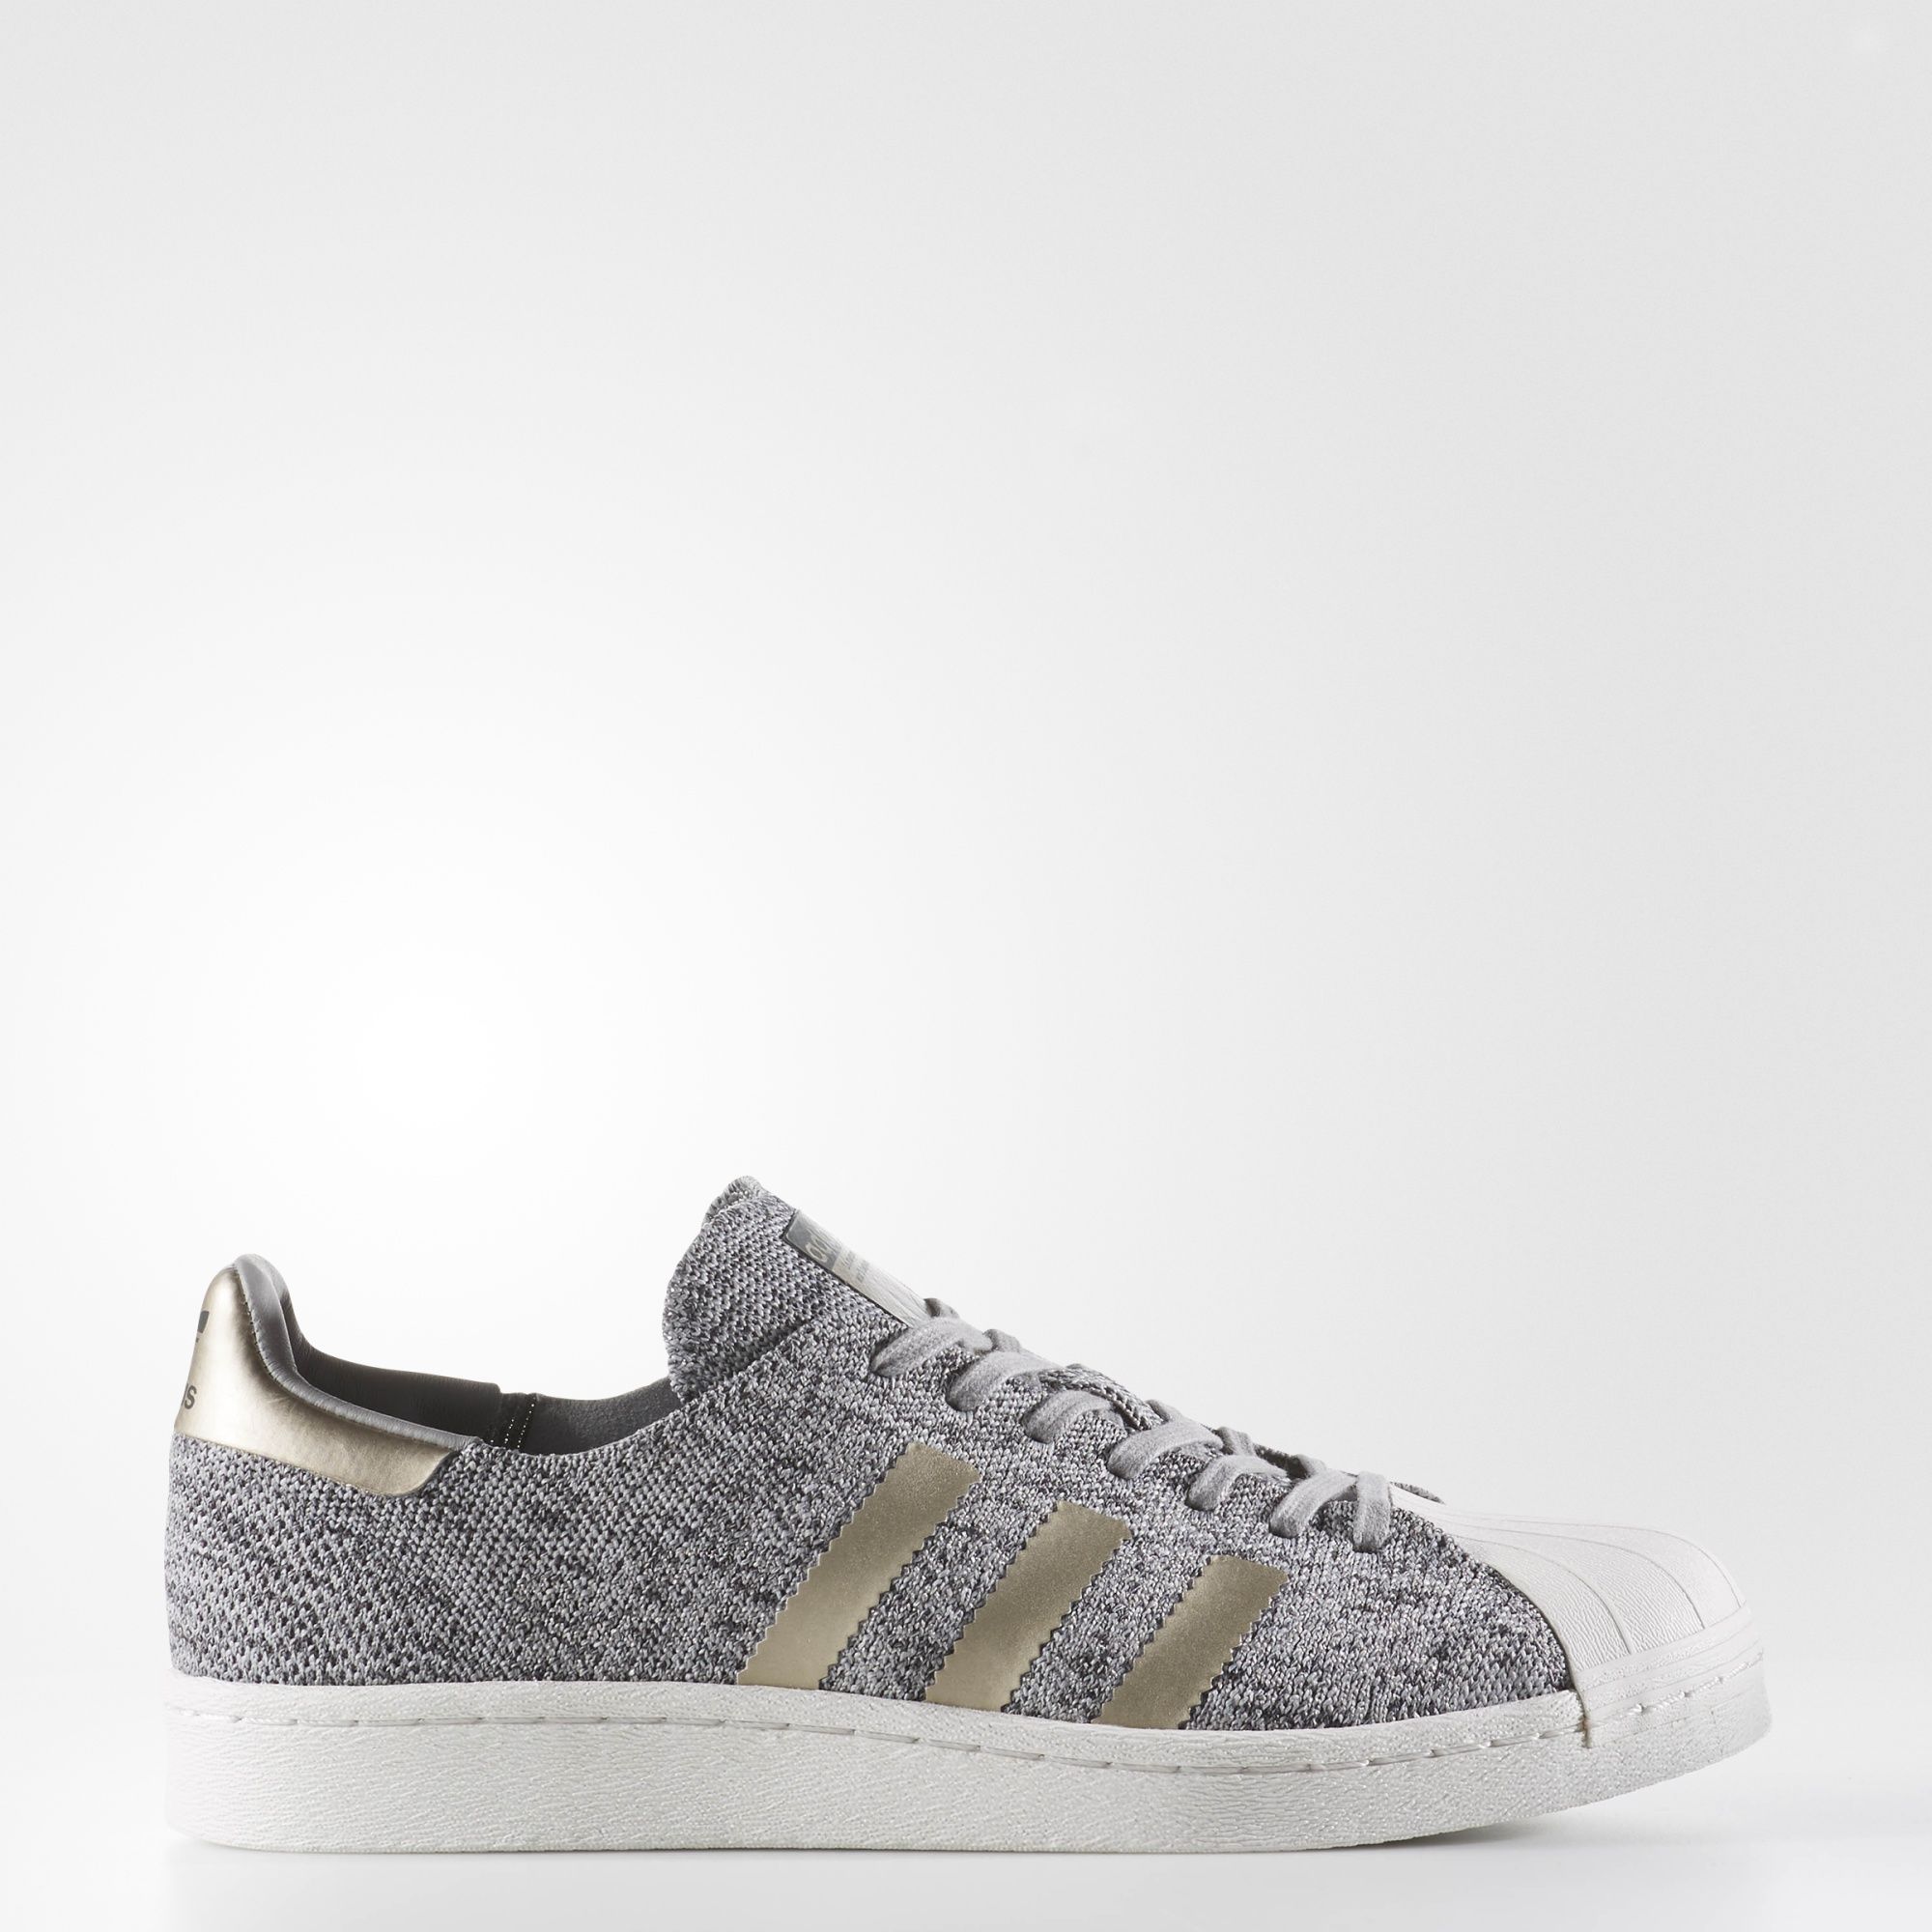 Adidas Pics, Products Collection